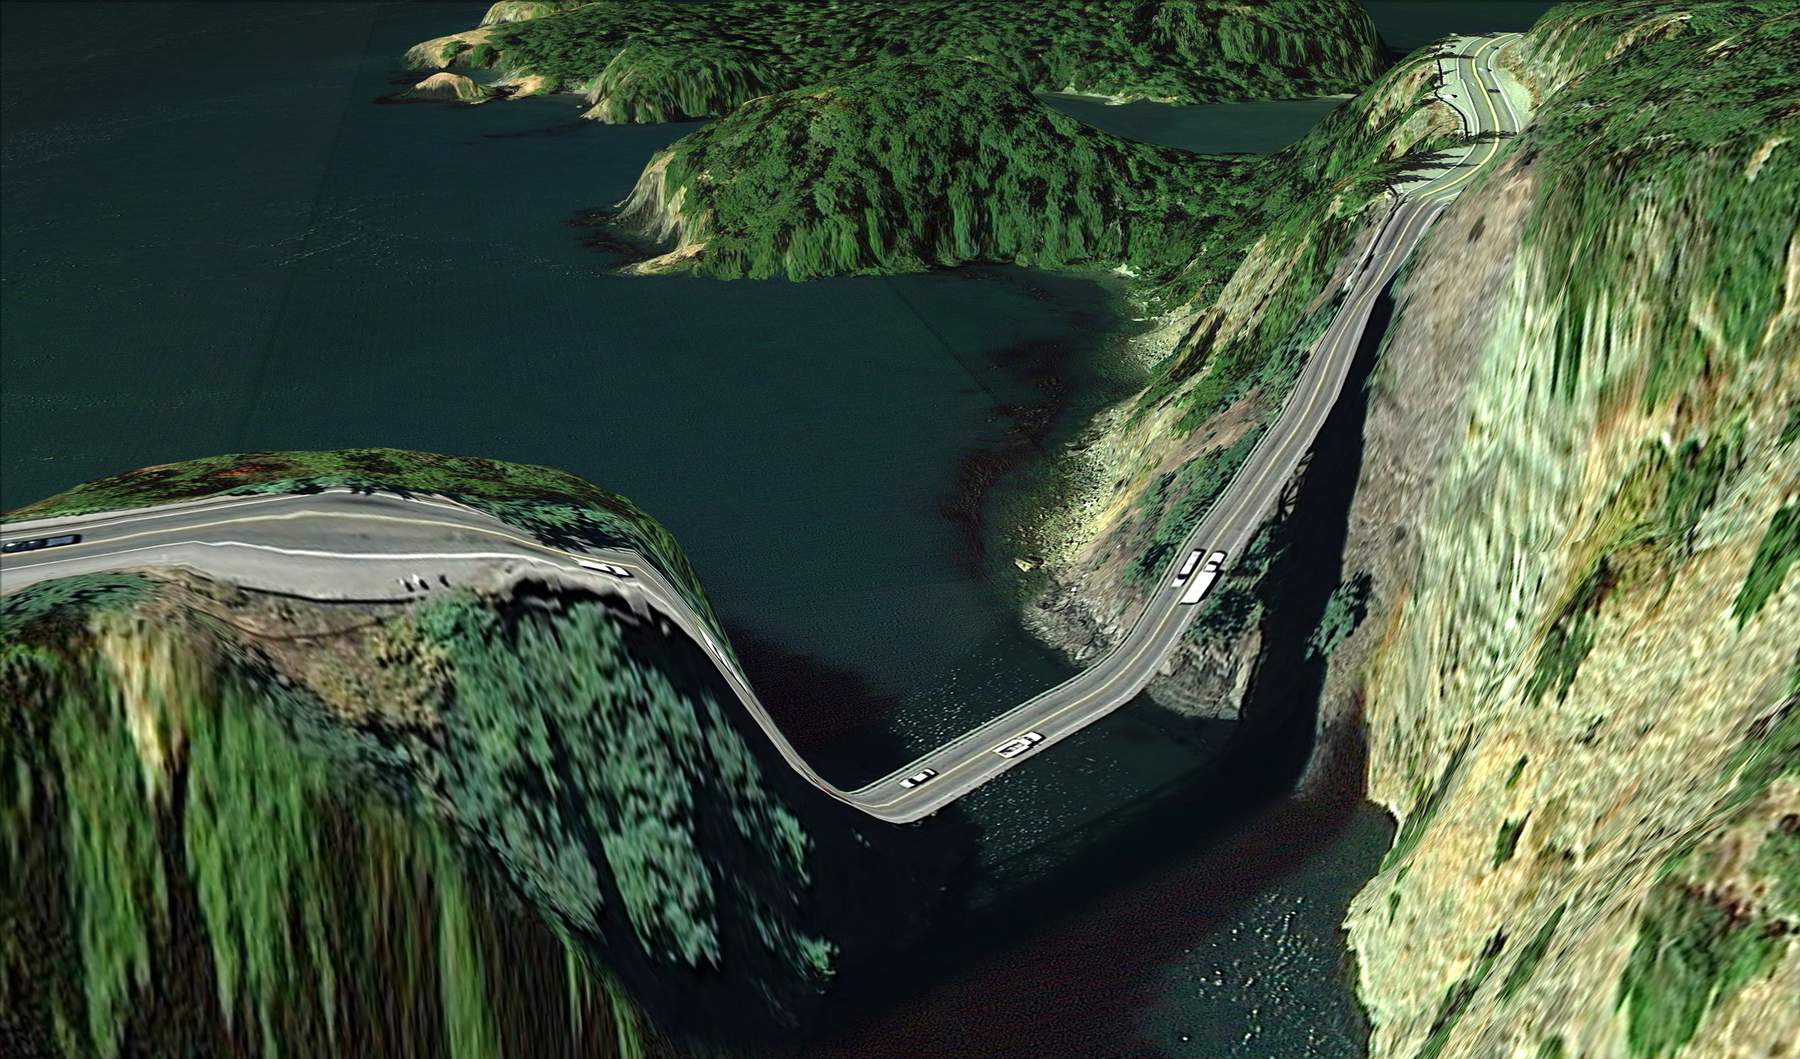 Clement Valla, Postcard from Google Earth (48°24’31.45″N, 122°38’45.52″W), 2010